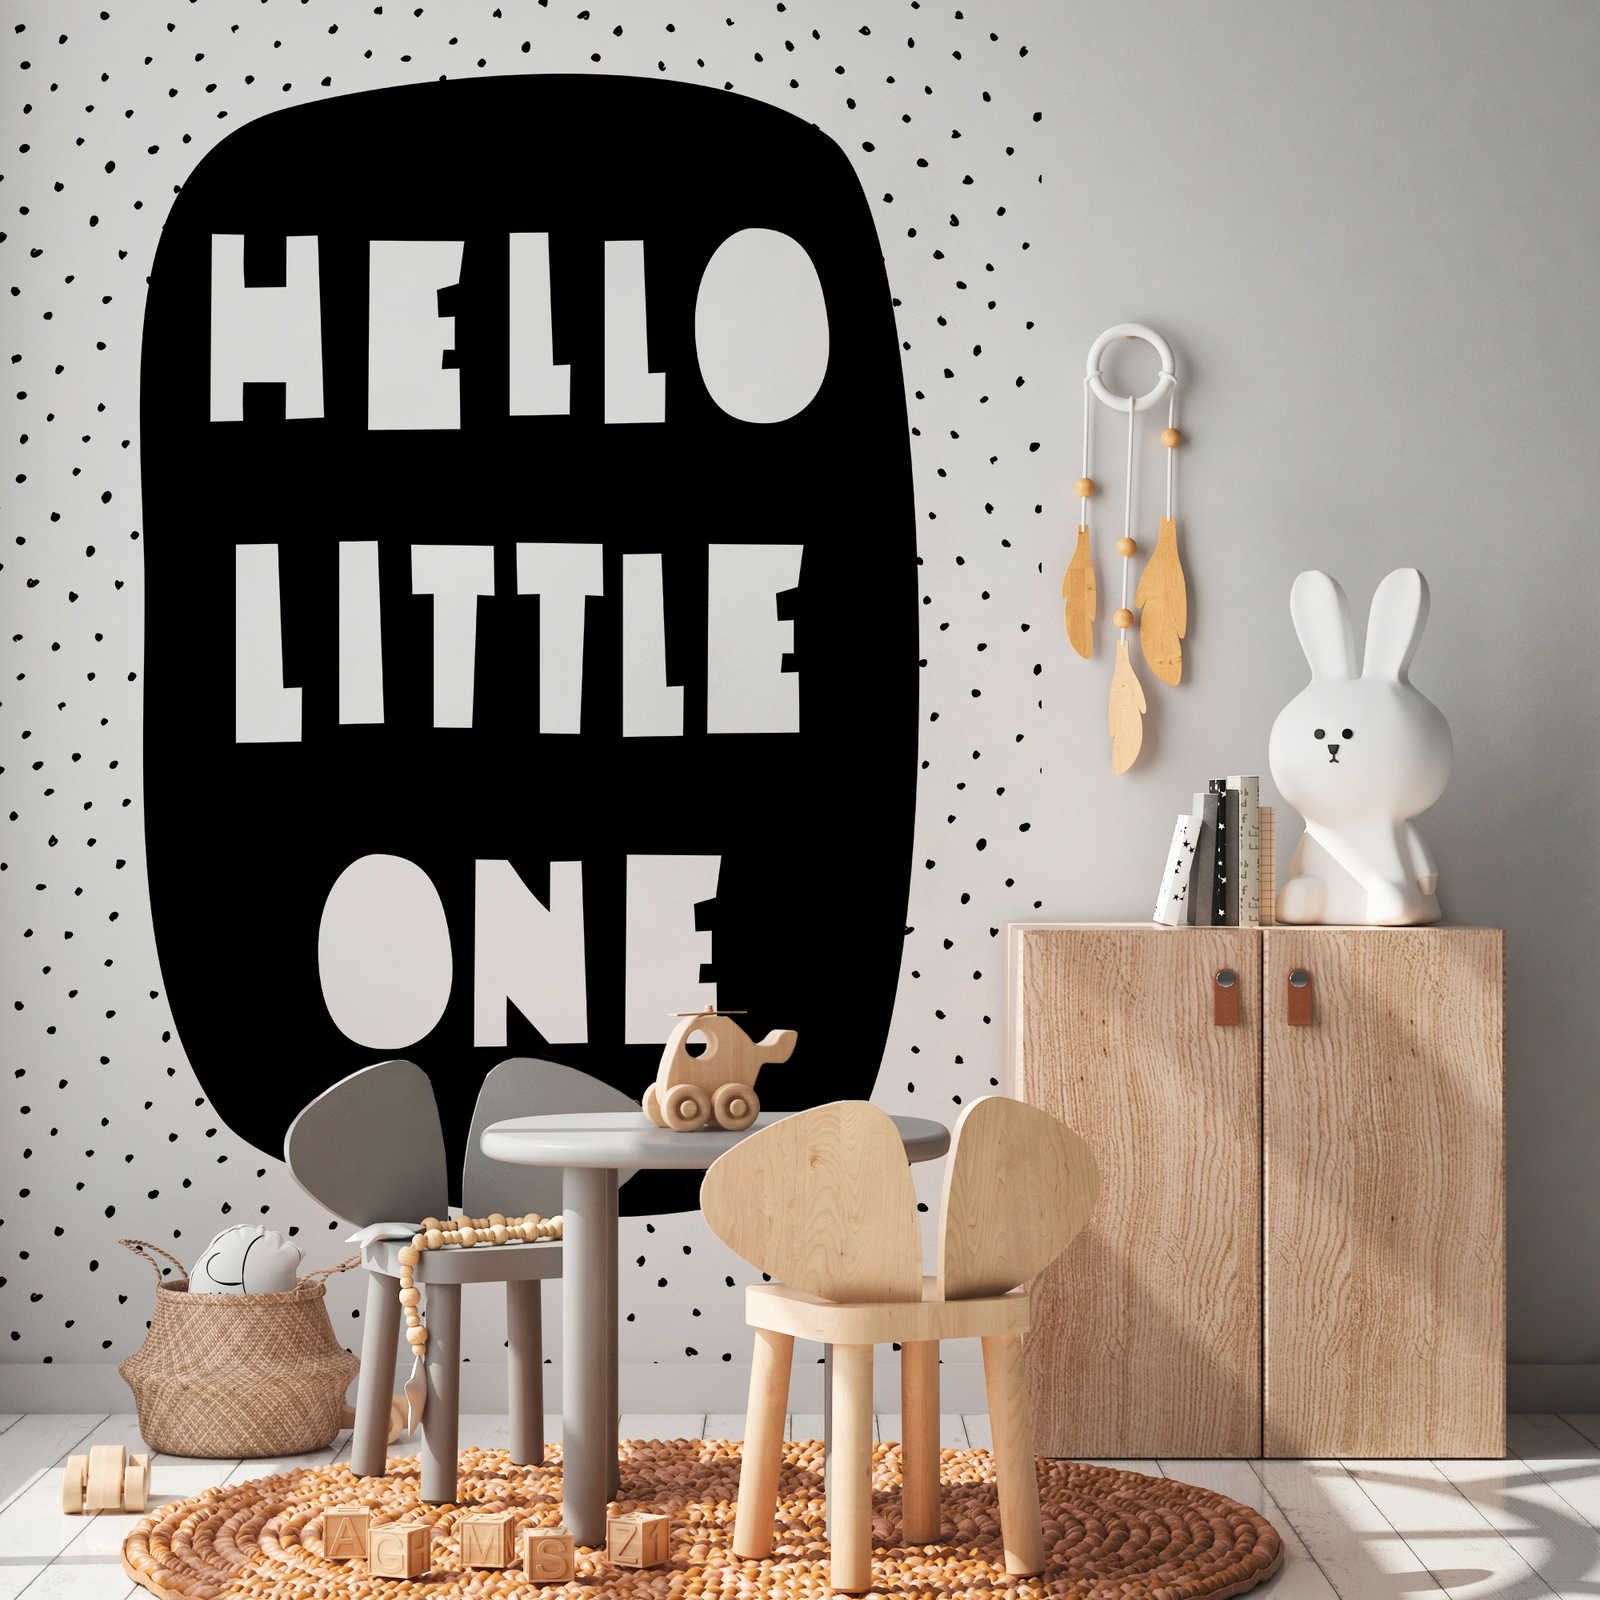 Photo wallpaper for children's room with lettering "Hello Little One" - Smooth & matt non-woven
